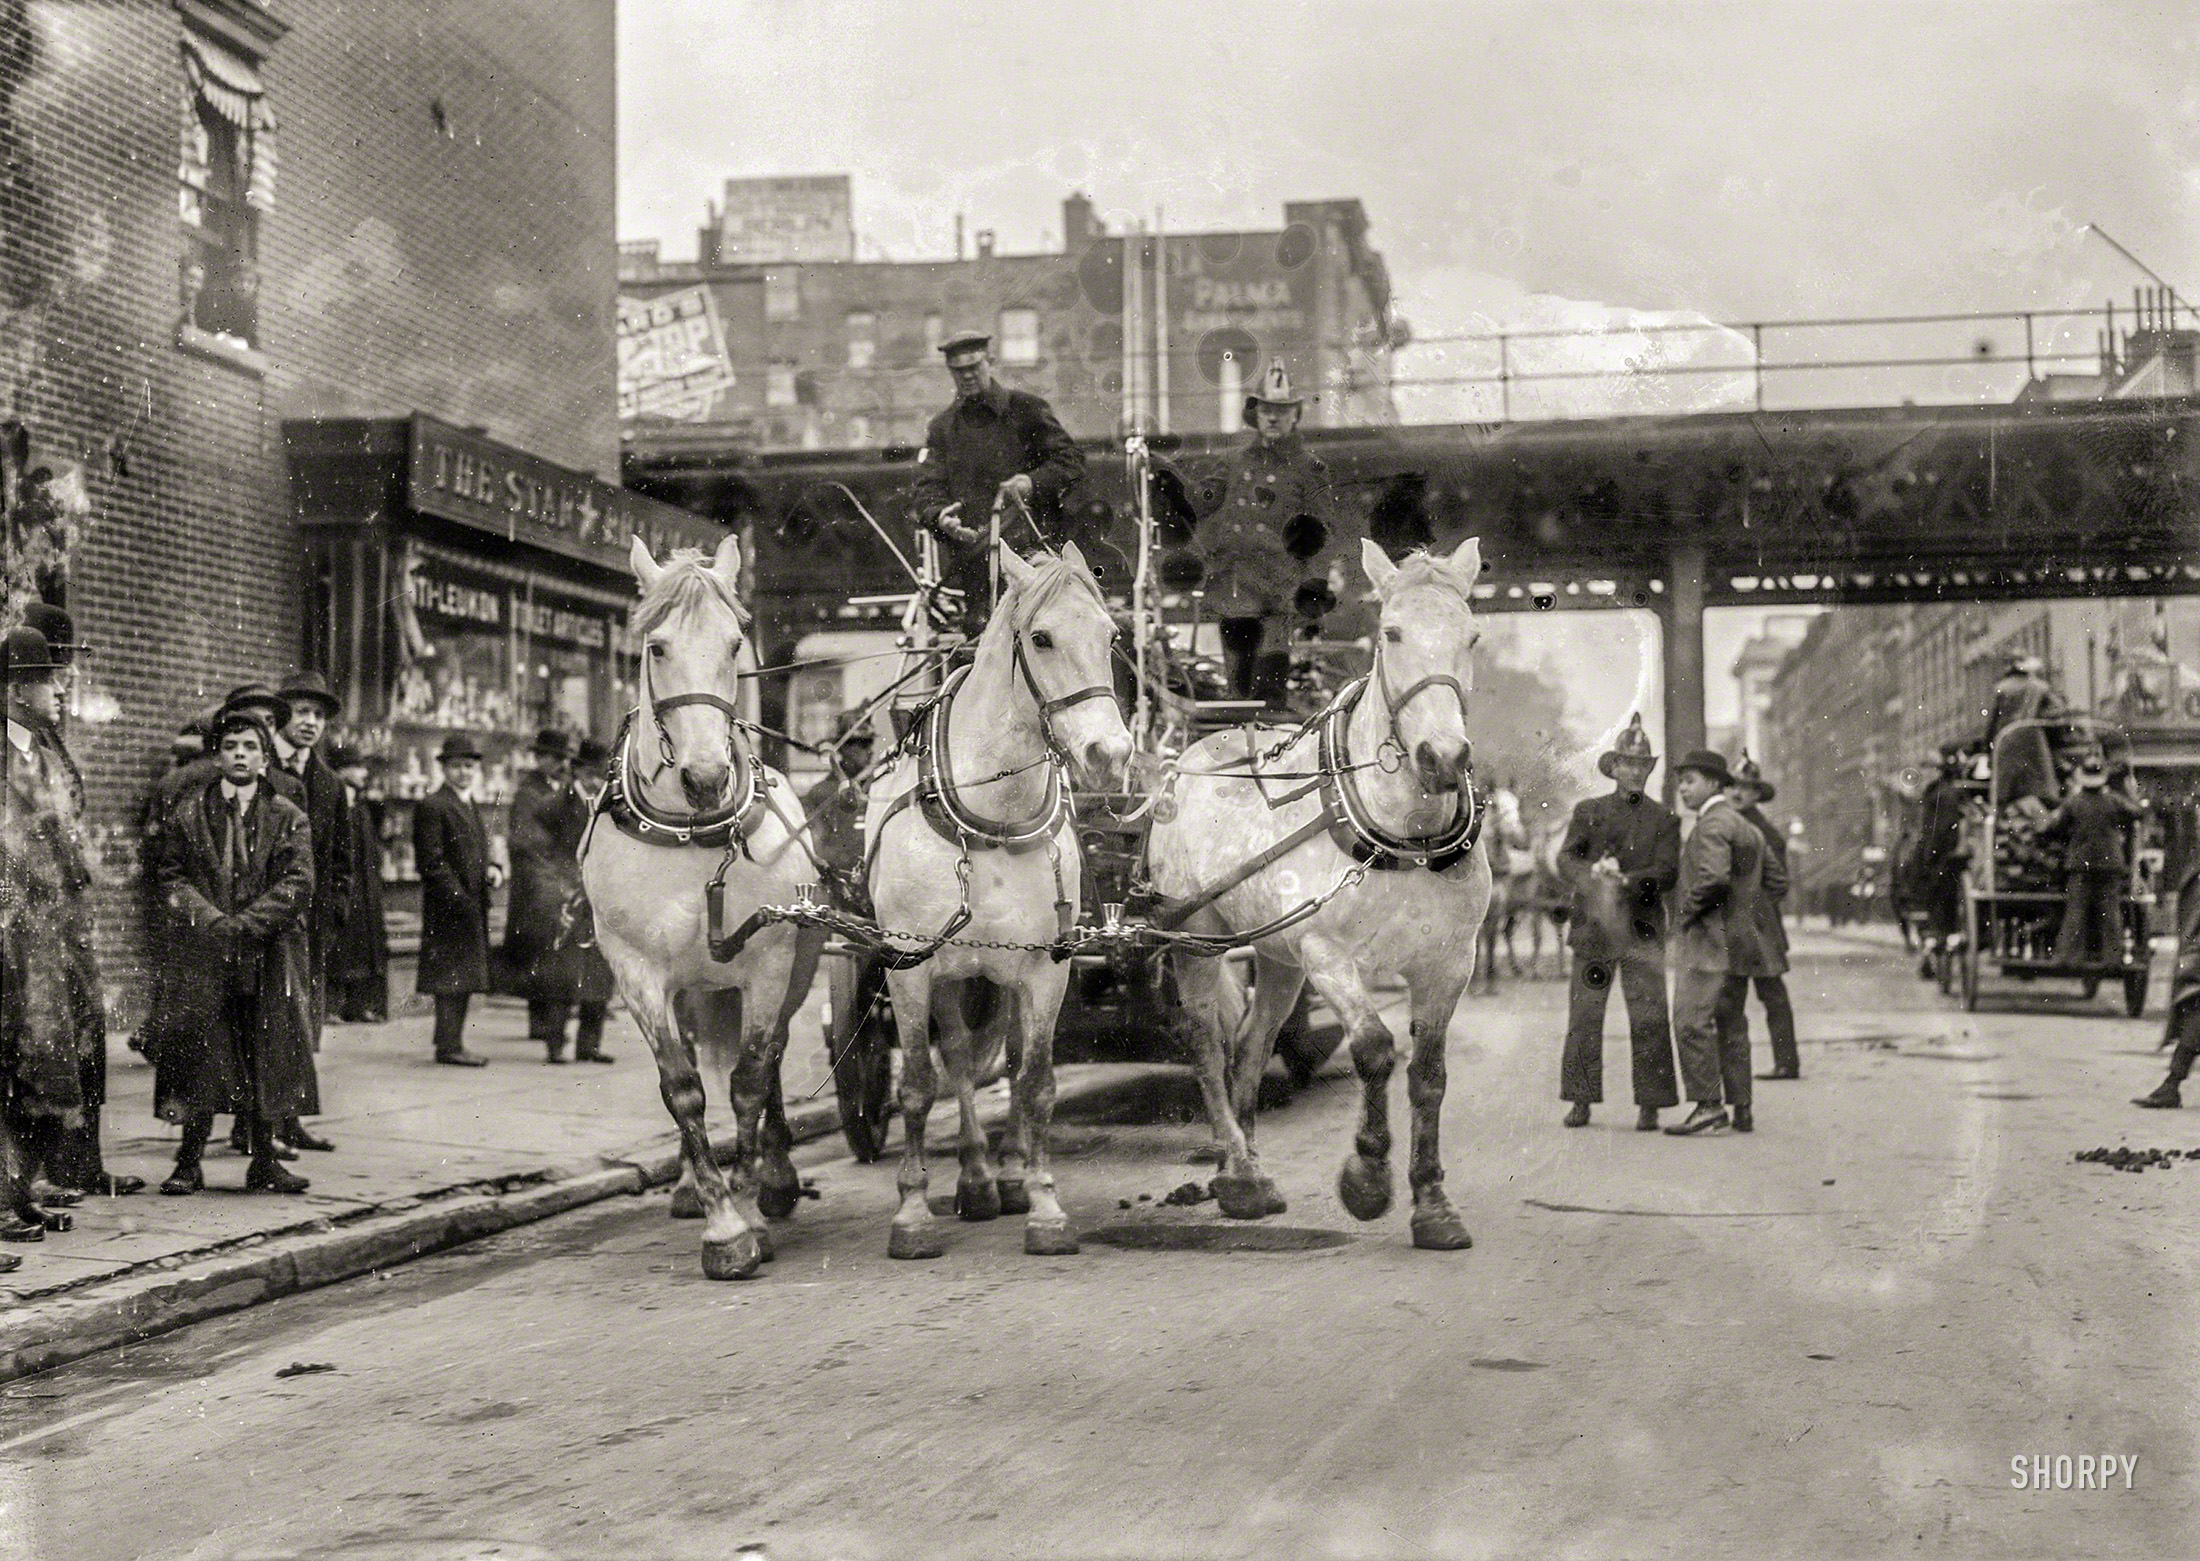 New York, December 1913. "Hook & Ladder Company No. 7, Third Avenue and 15th Street." 5x7 inch glass negative, Bain News Service. View full size.